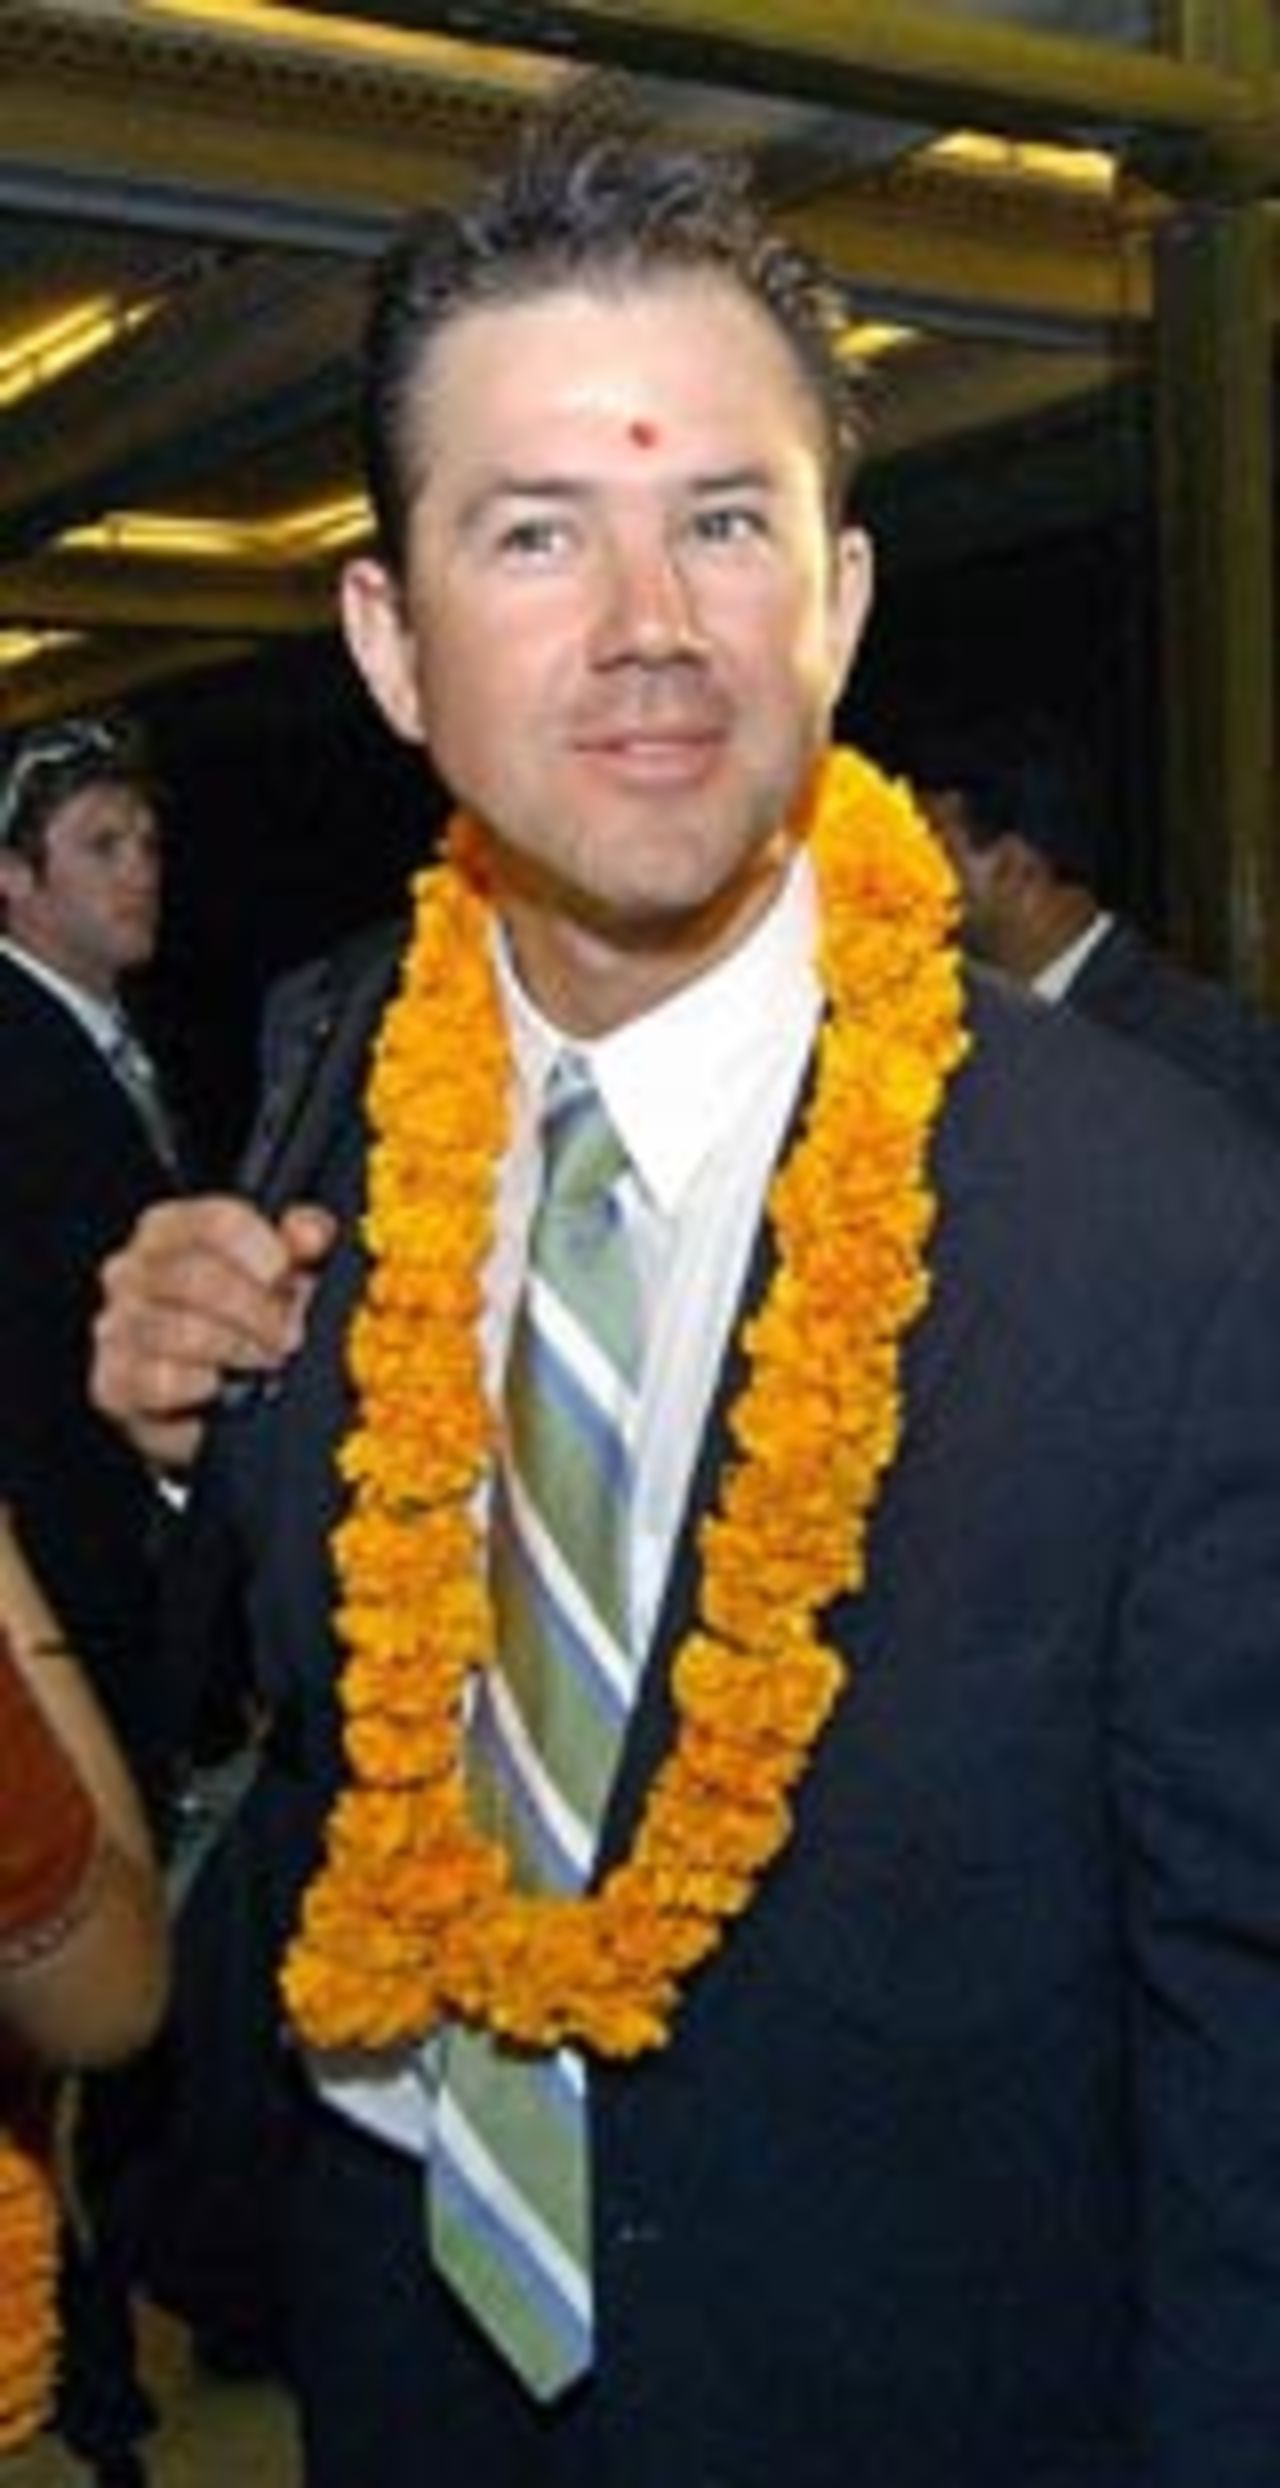 Ricky Ponting is welcomed to India for the TVS Cup, 2003